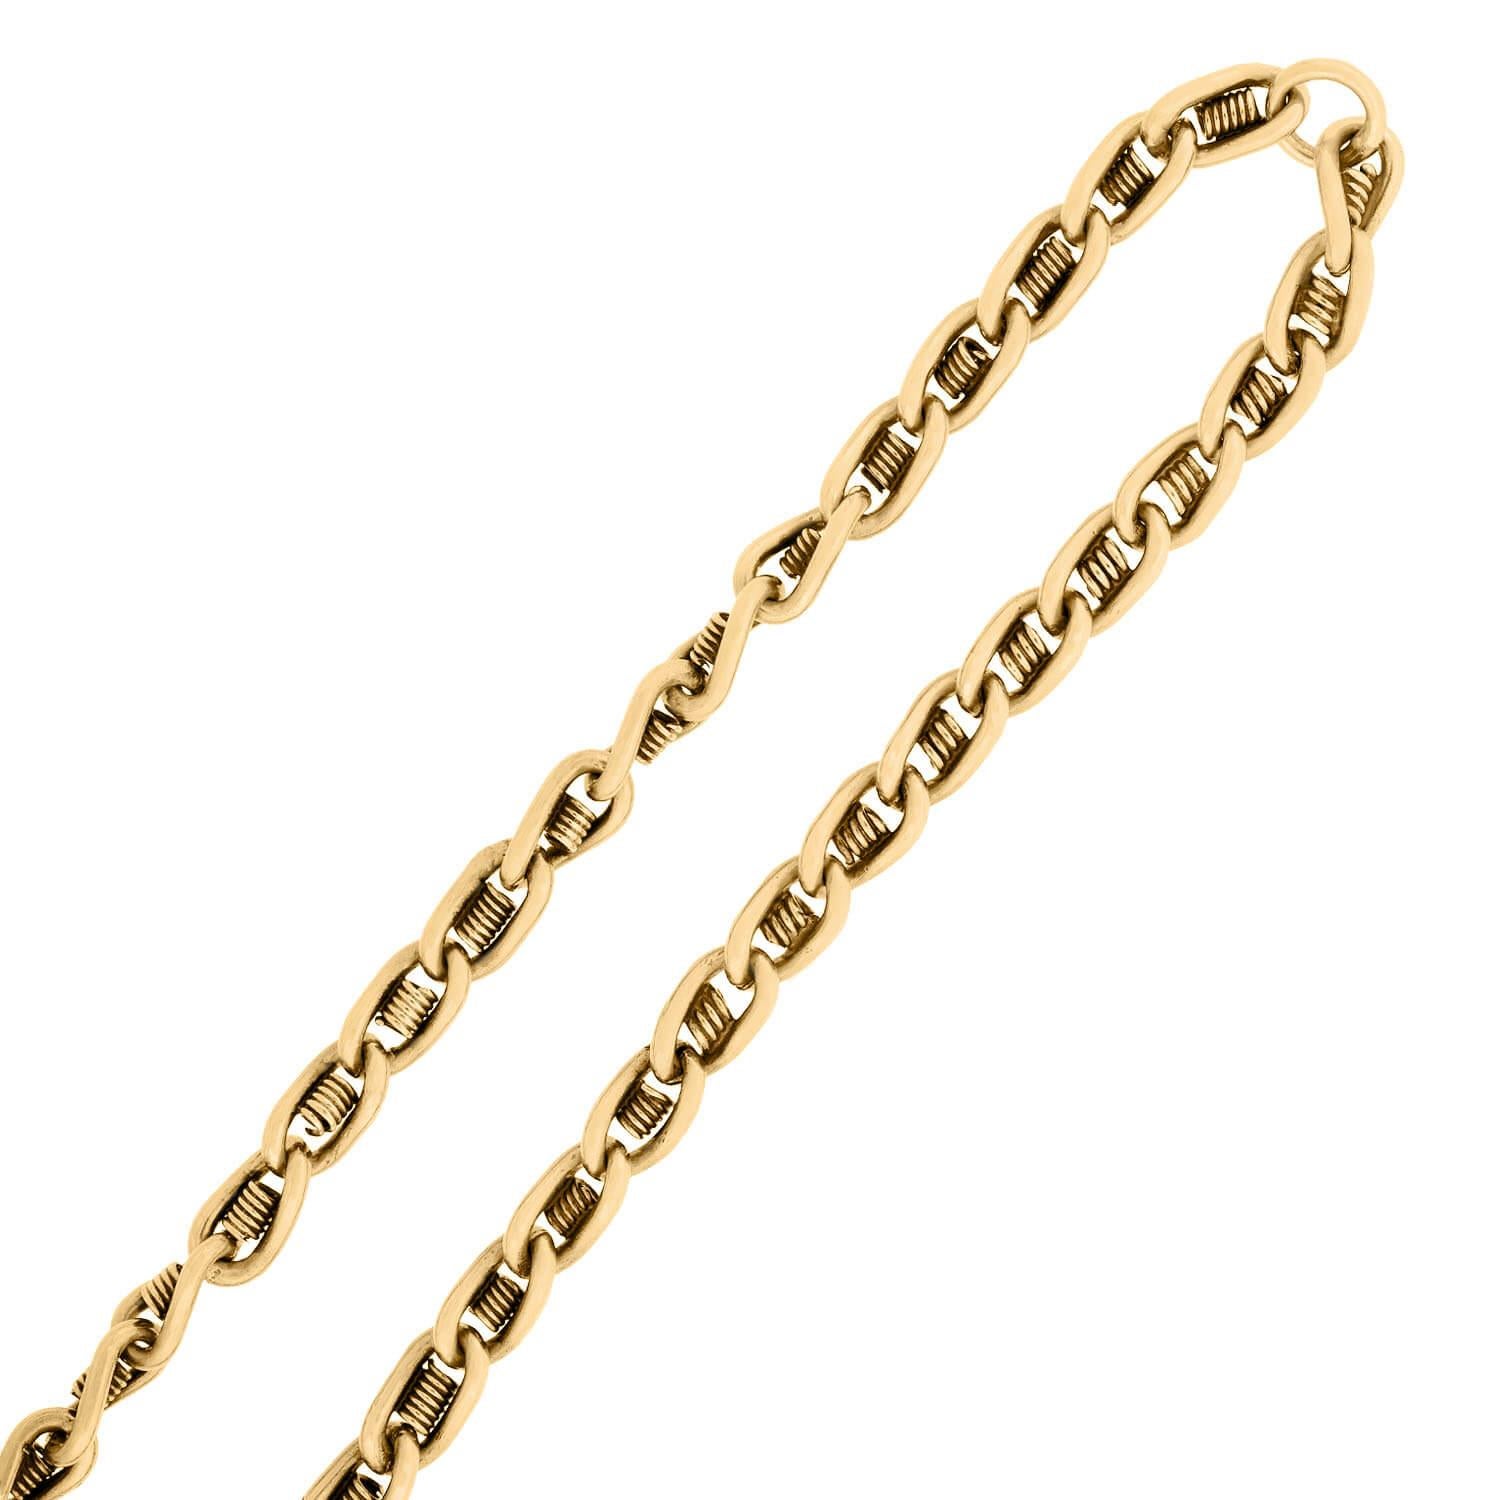 A beautiful spring chain from the Victorian (ca1880s) era! This wonderful piece is crafted in 14kt rosy yellow gold to form a fabulous necklace! The chain is comprised of simple curb links with a spring motif separating each link. The necklace